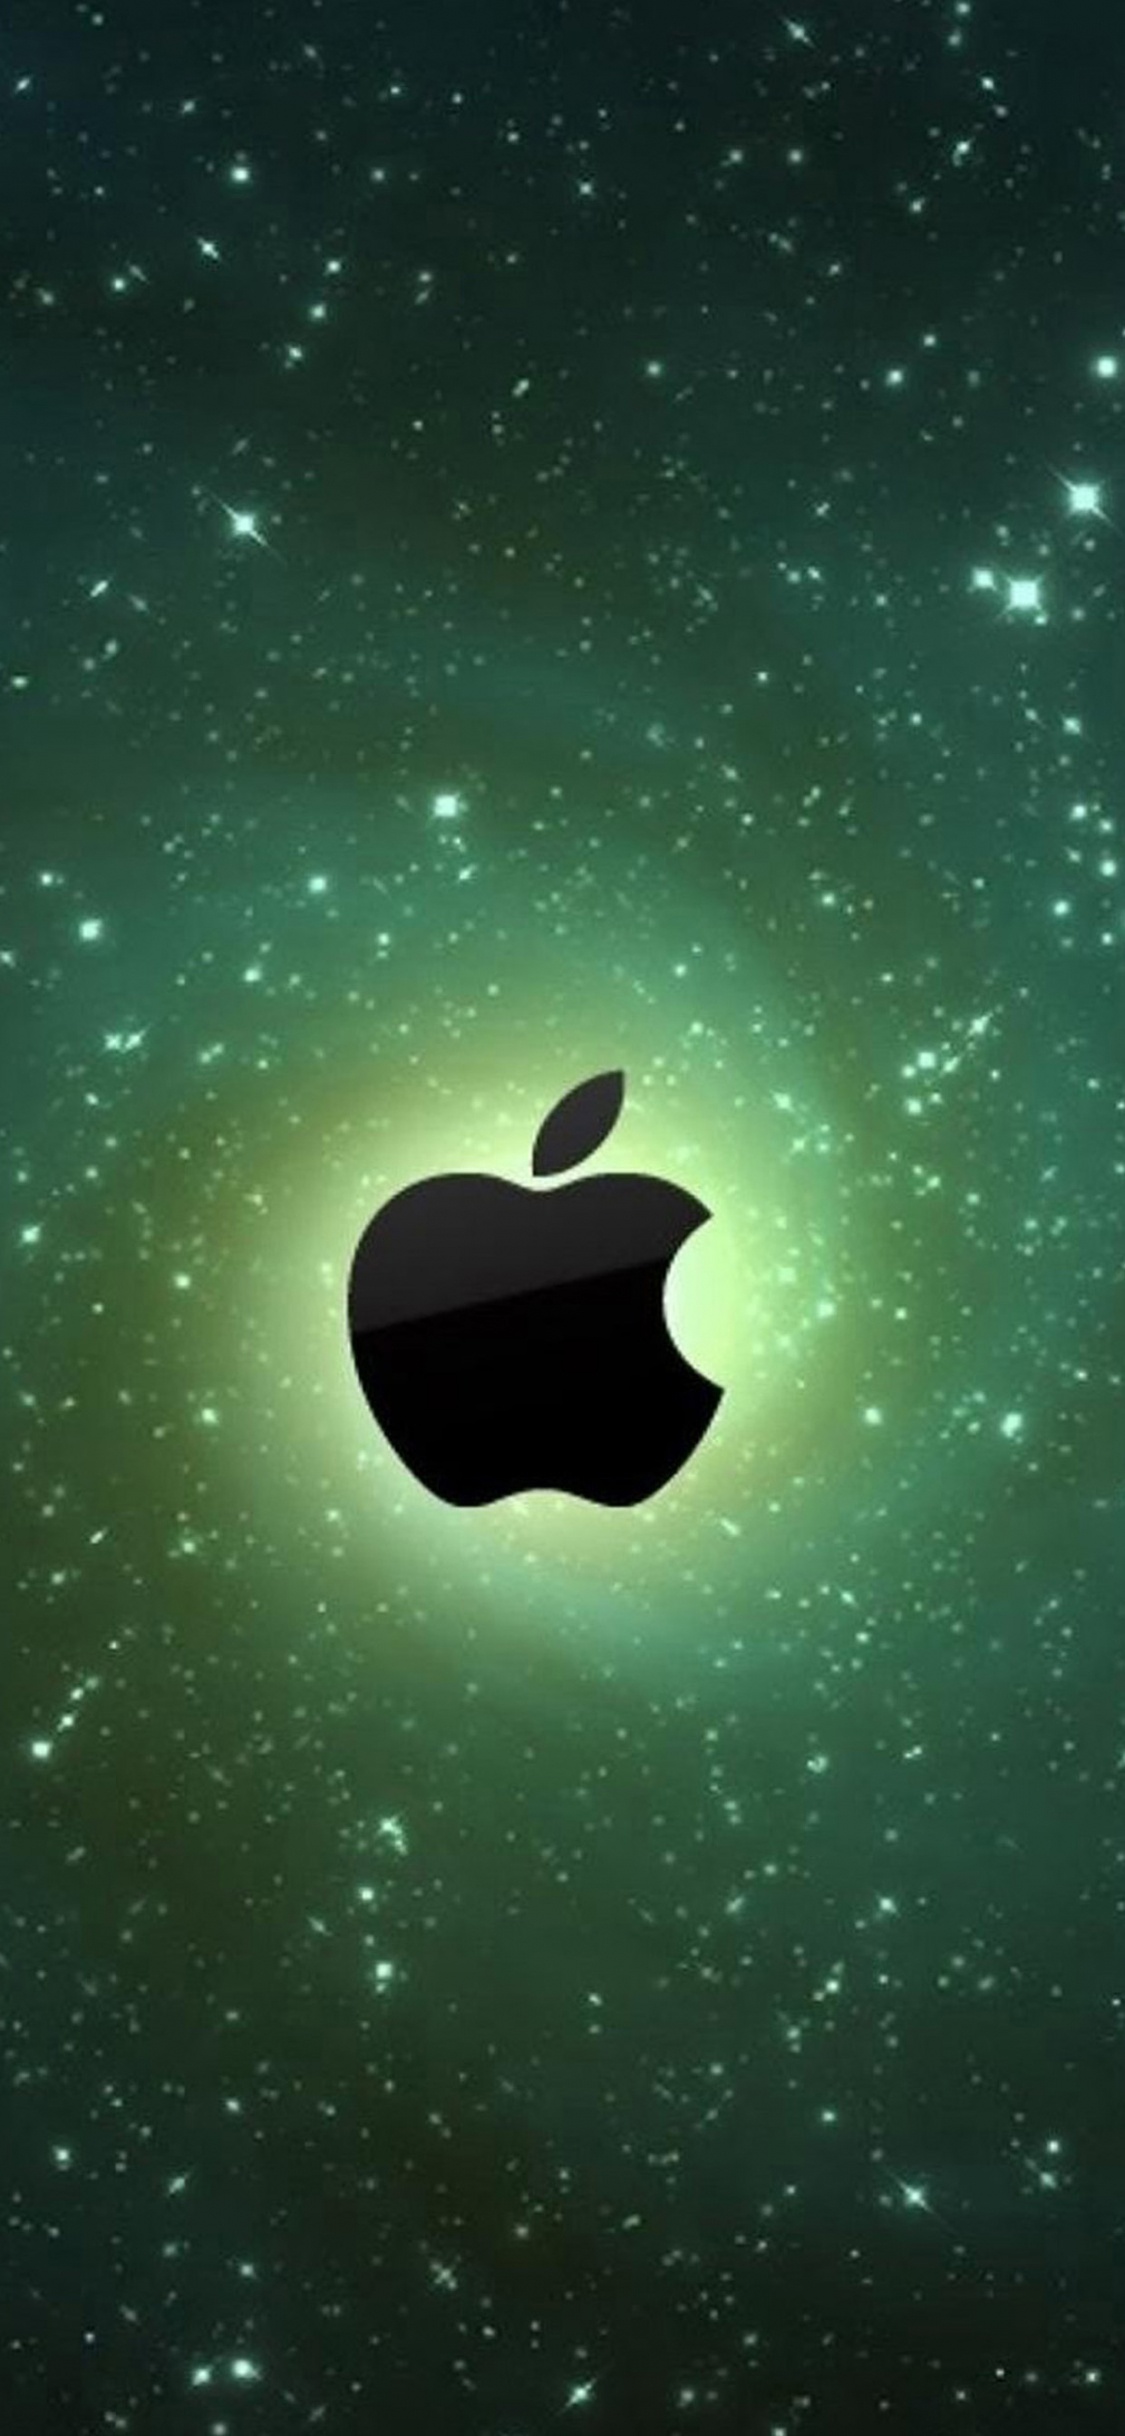 Apple, Graphics, Green, Atmosphere, Illustration. Wallpaper in 1125x2436 Resolution